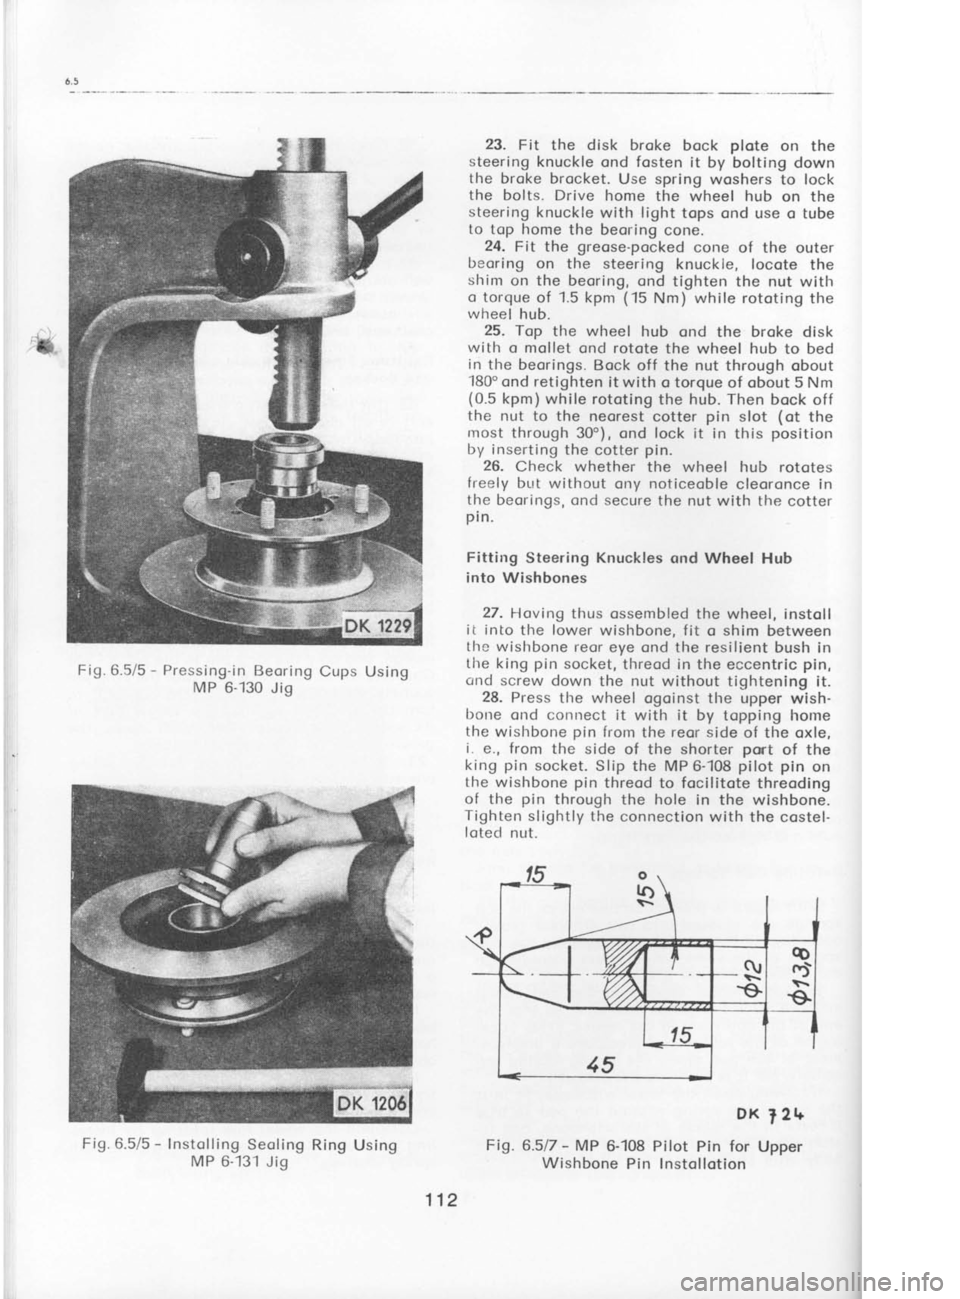 SKODA 105S 1980  Workshop Manual 1
\
I
(
r
t
(
s I
I
(
S
lf
m
gr
lir
O1
sy
ro
po
th
th
th, tir
on
m€
tht
of
onl
I
by tr
Cl
A
6-
tl-
th
th
Fig.6.5/5 
- 
Pressing-in  Beoring Cups Using
MP  6-130 Jig
Fig.6.5/5  - 
Instolling  Seoling